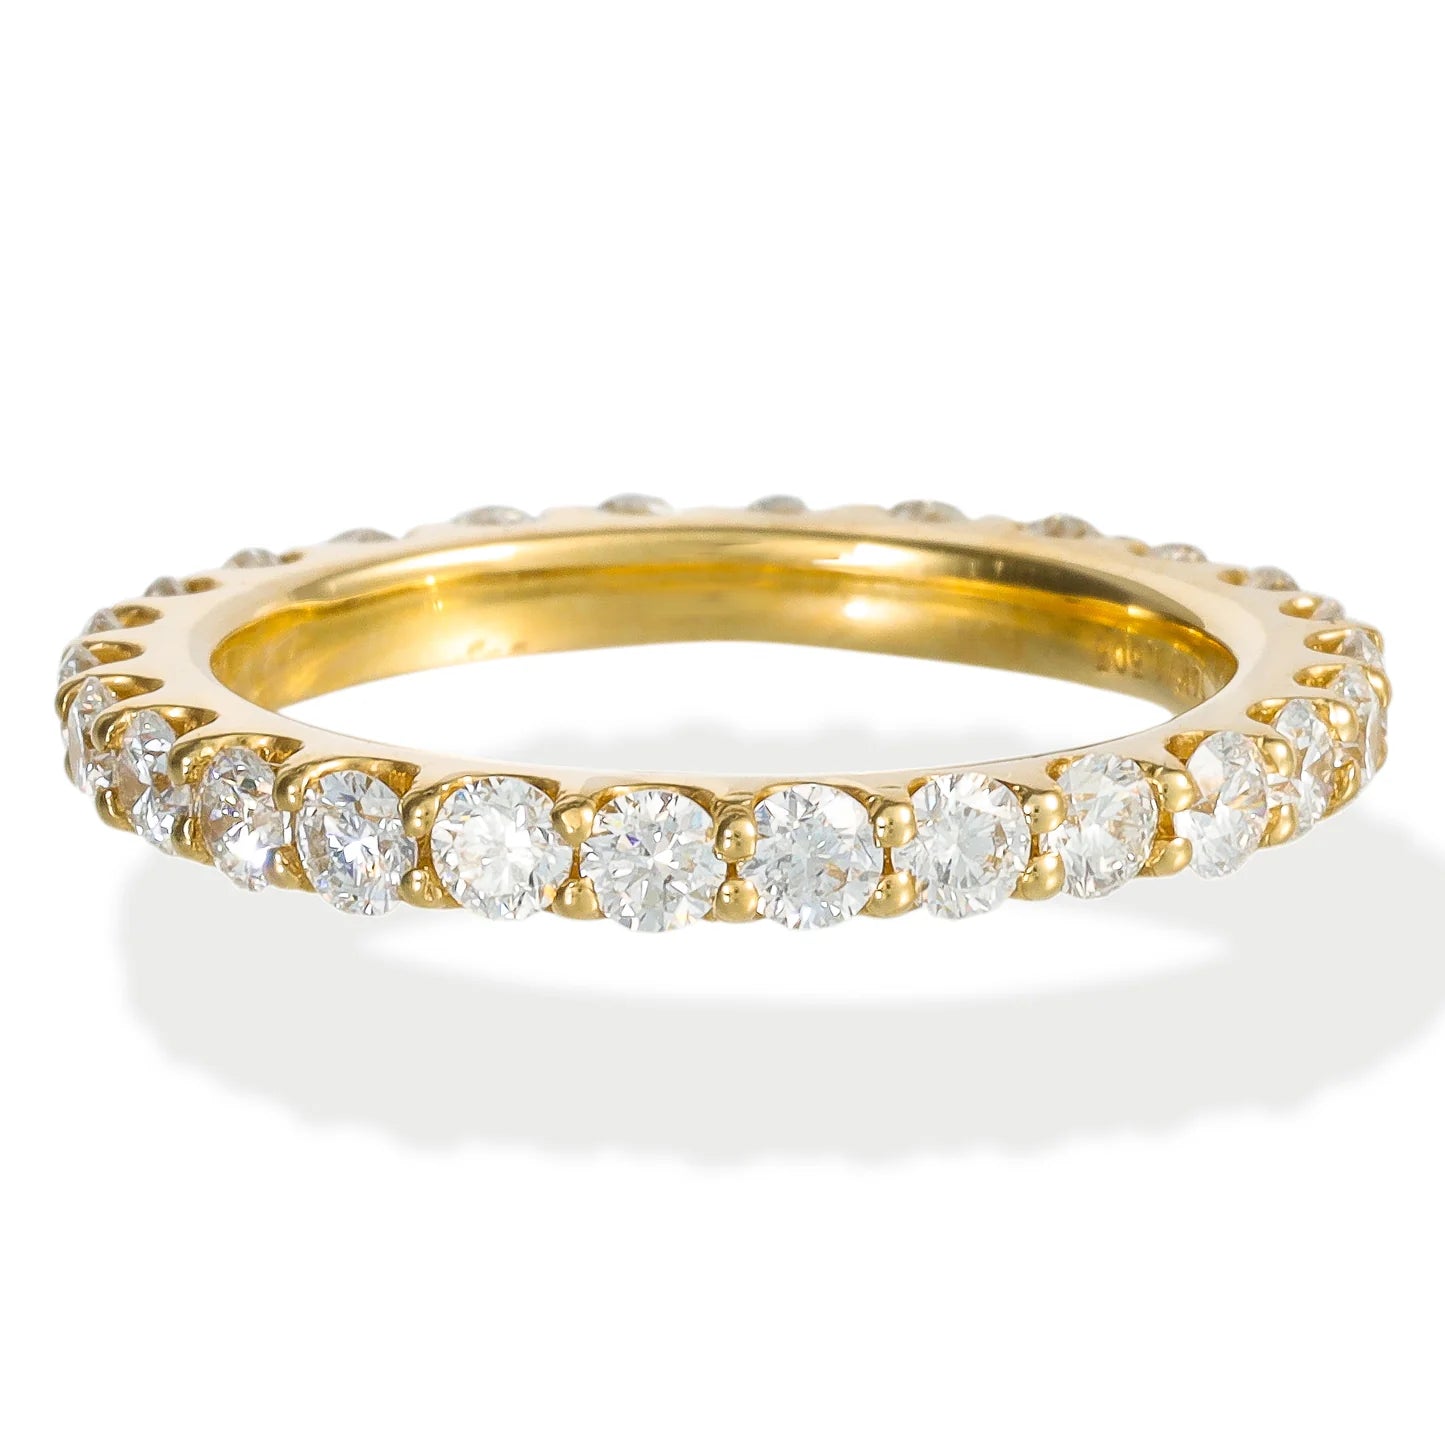 Double Cushion Frame Diamond Ring Set in 14kt Gold